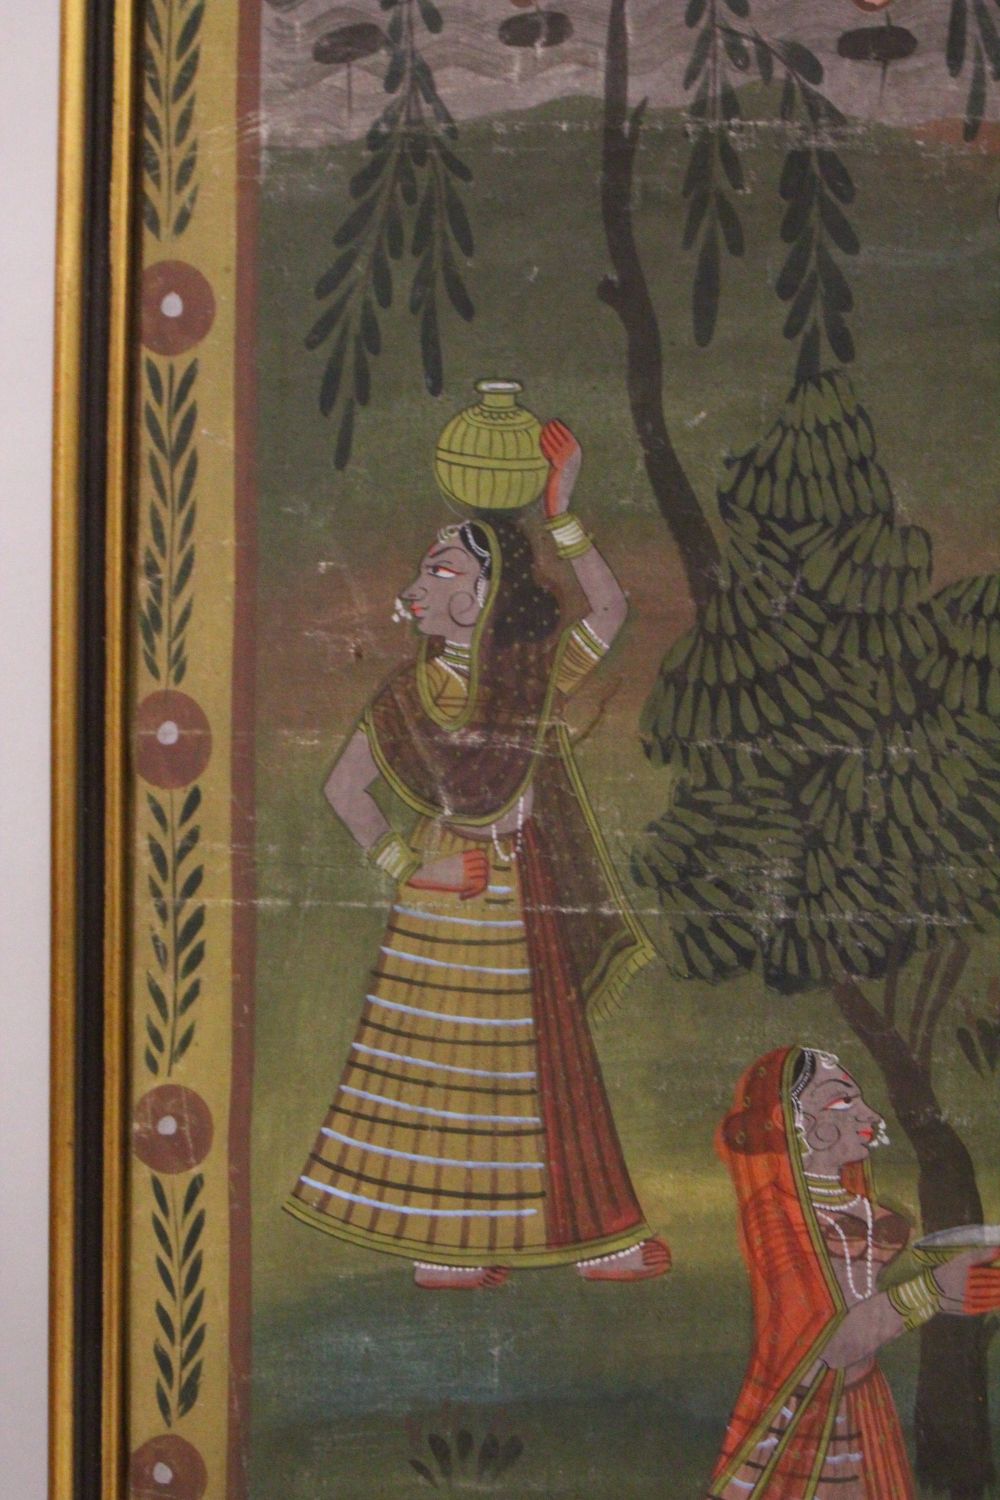 A 19TH-20TH CENTURY FRAMED INDIAN PAINTING ON TEXTILE depicting a prince presenting orange paint - Image 3 of 3